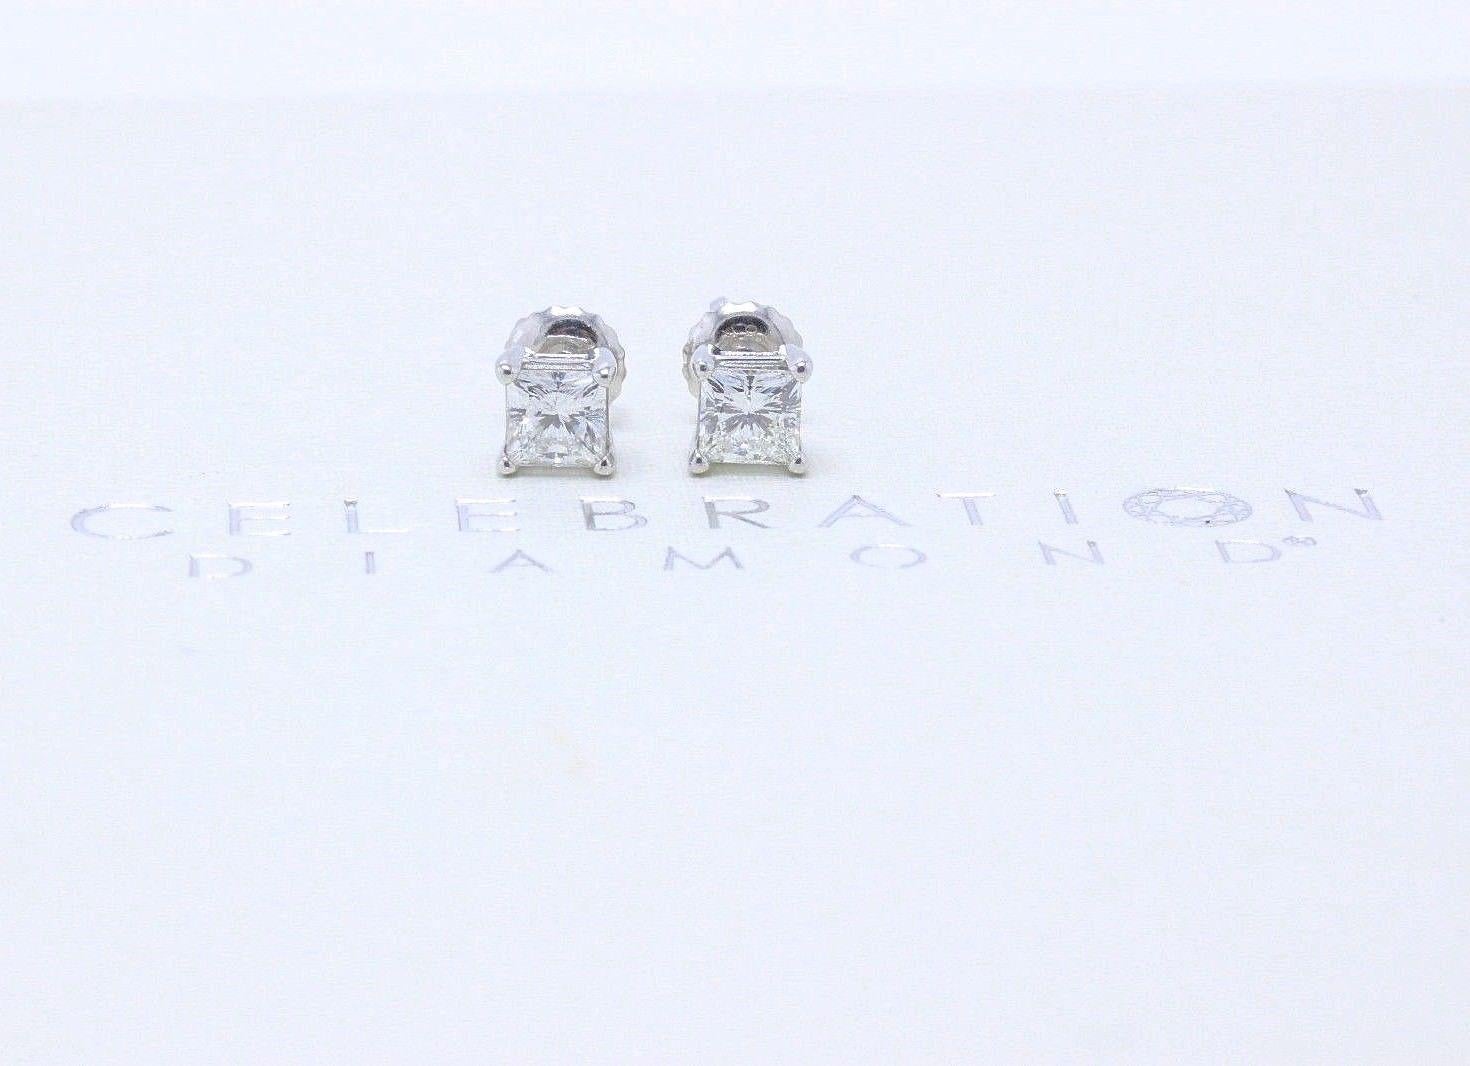 CELEBRATION DIAMOND
Style:  Diamond Stud Earrings
Serial Number:  CEL552093 0.49 CT H SI2 / CEL552076 0.49 CT H SI1
Metal:  18KT White Gold
Total Carat Weight:  0.98 TCW
Diamond Shape:  Princess Cuts
Diamond Color & Clarity:  H - SI1 / H -